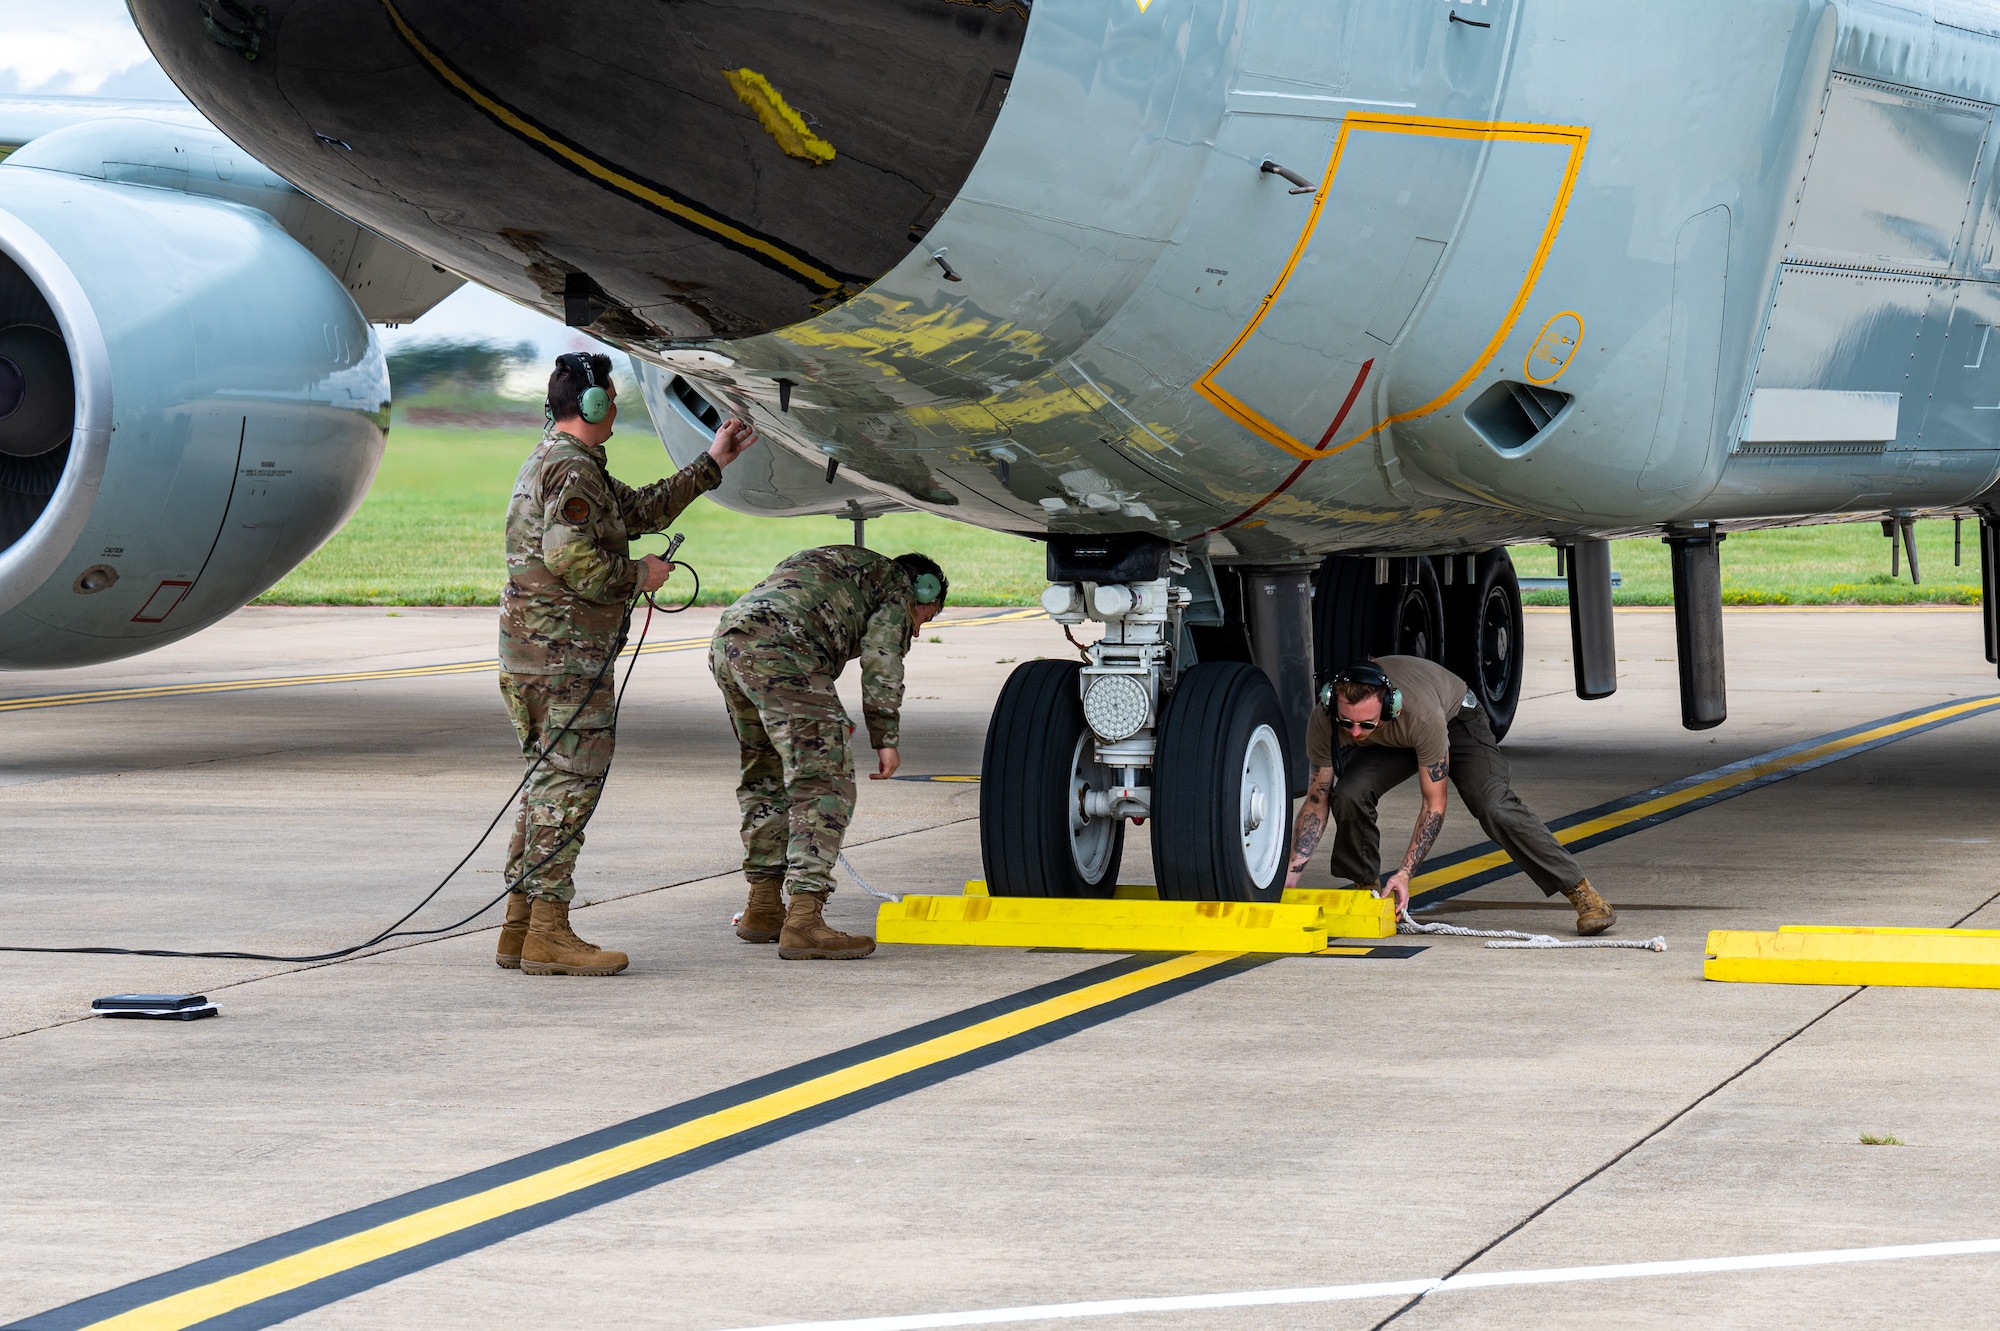 U.S. Air Force maintenance Airmen, assigned to the 95th Reconnaissance Squadron, place wheel chocks around the nose gear of a RC-135 Rivet Joint aircraft to begin the first hot-pit refueling mission for the airframe at Royal Air Force Mildenhall, England, Aug. 14, 2023.